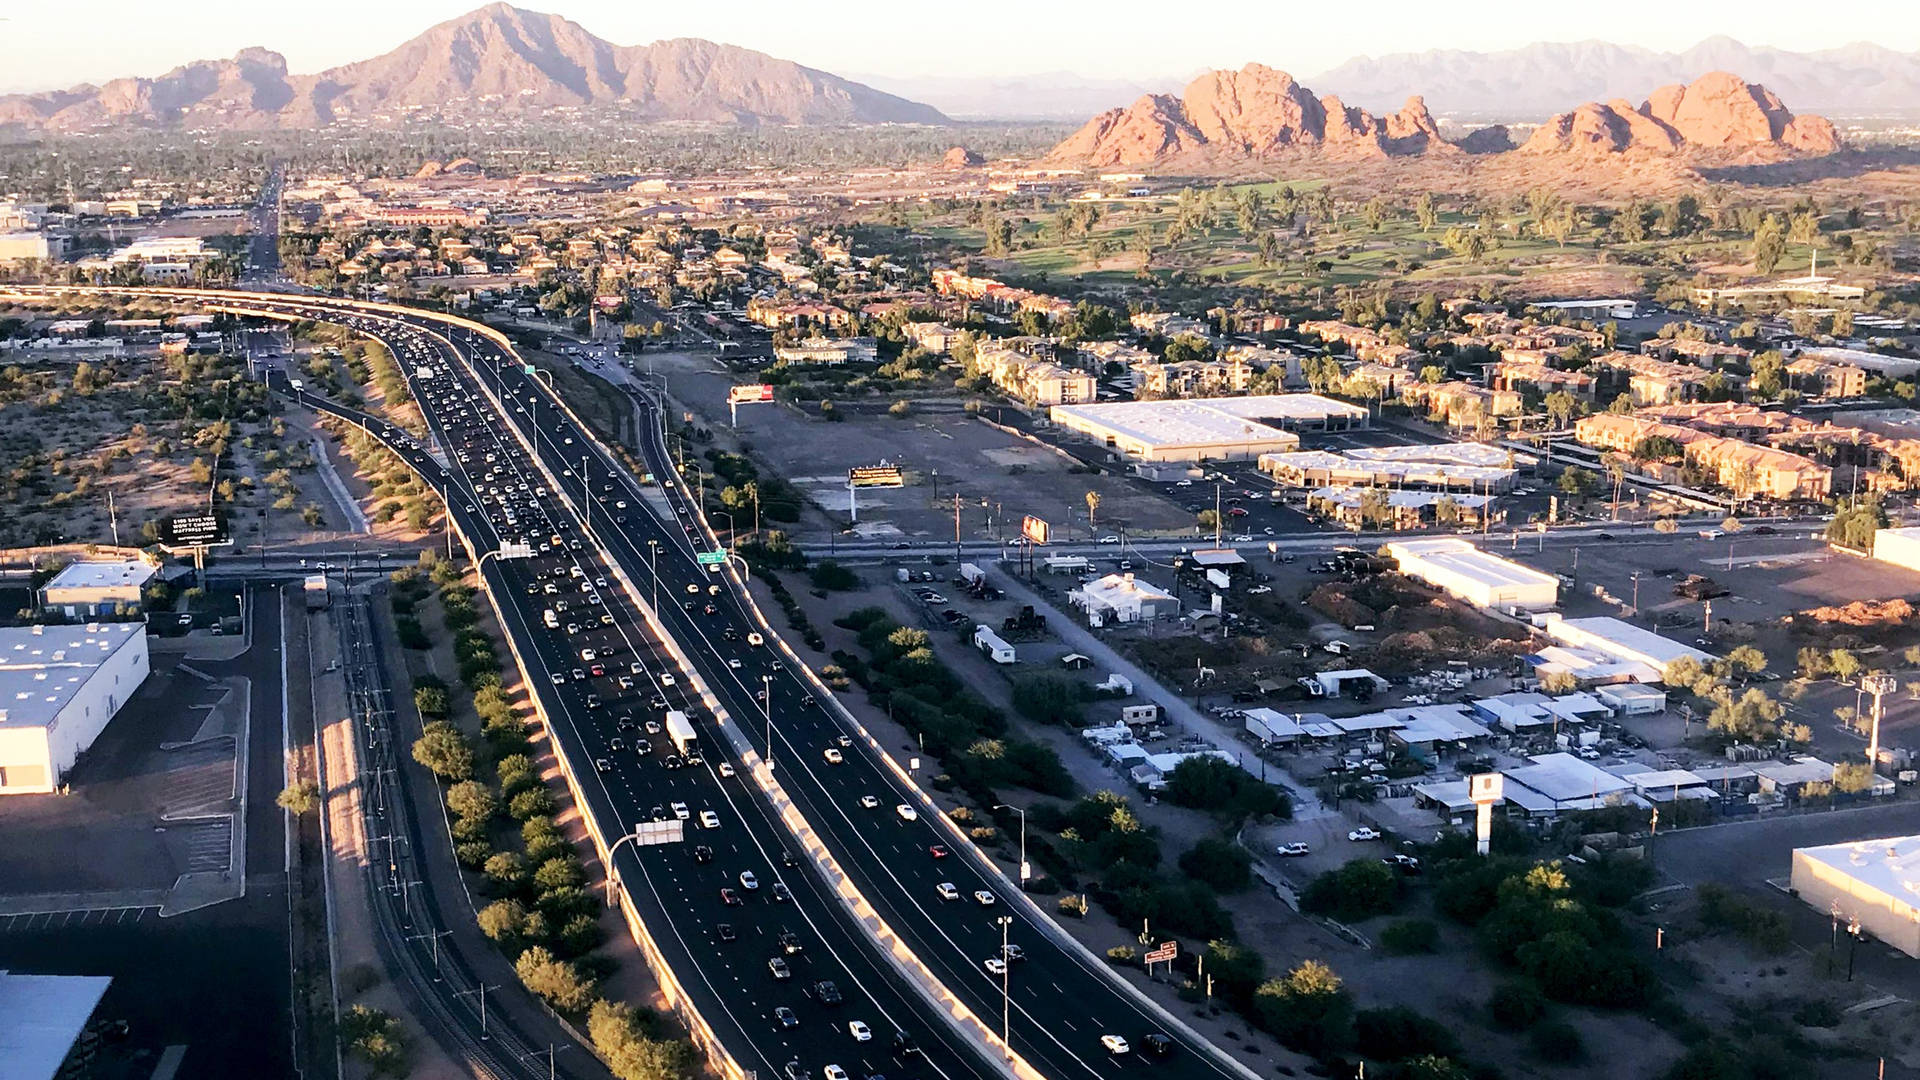 The Highways And Mountains Of Chandler Background